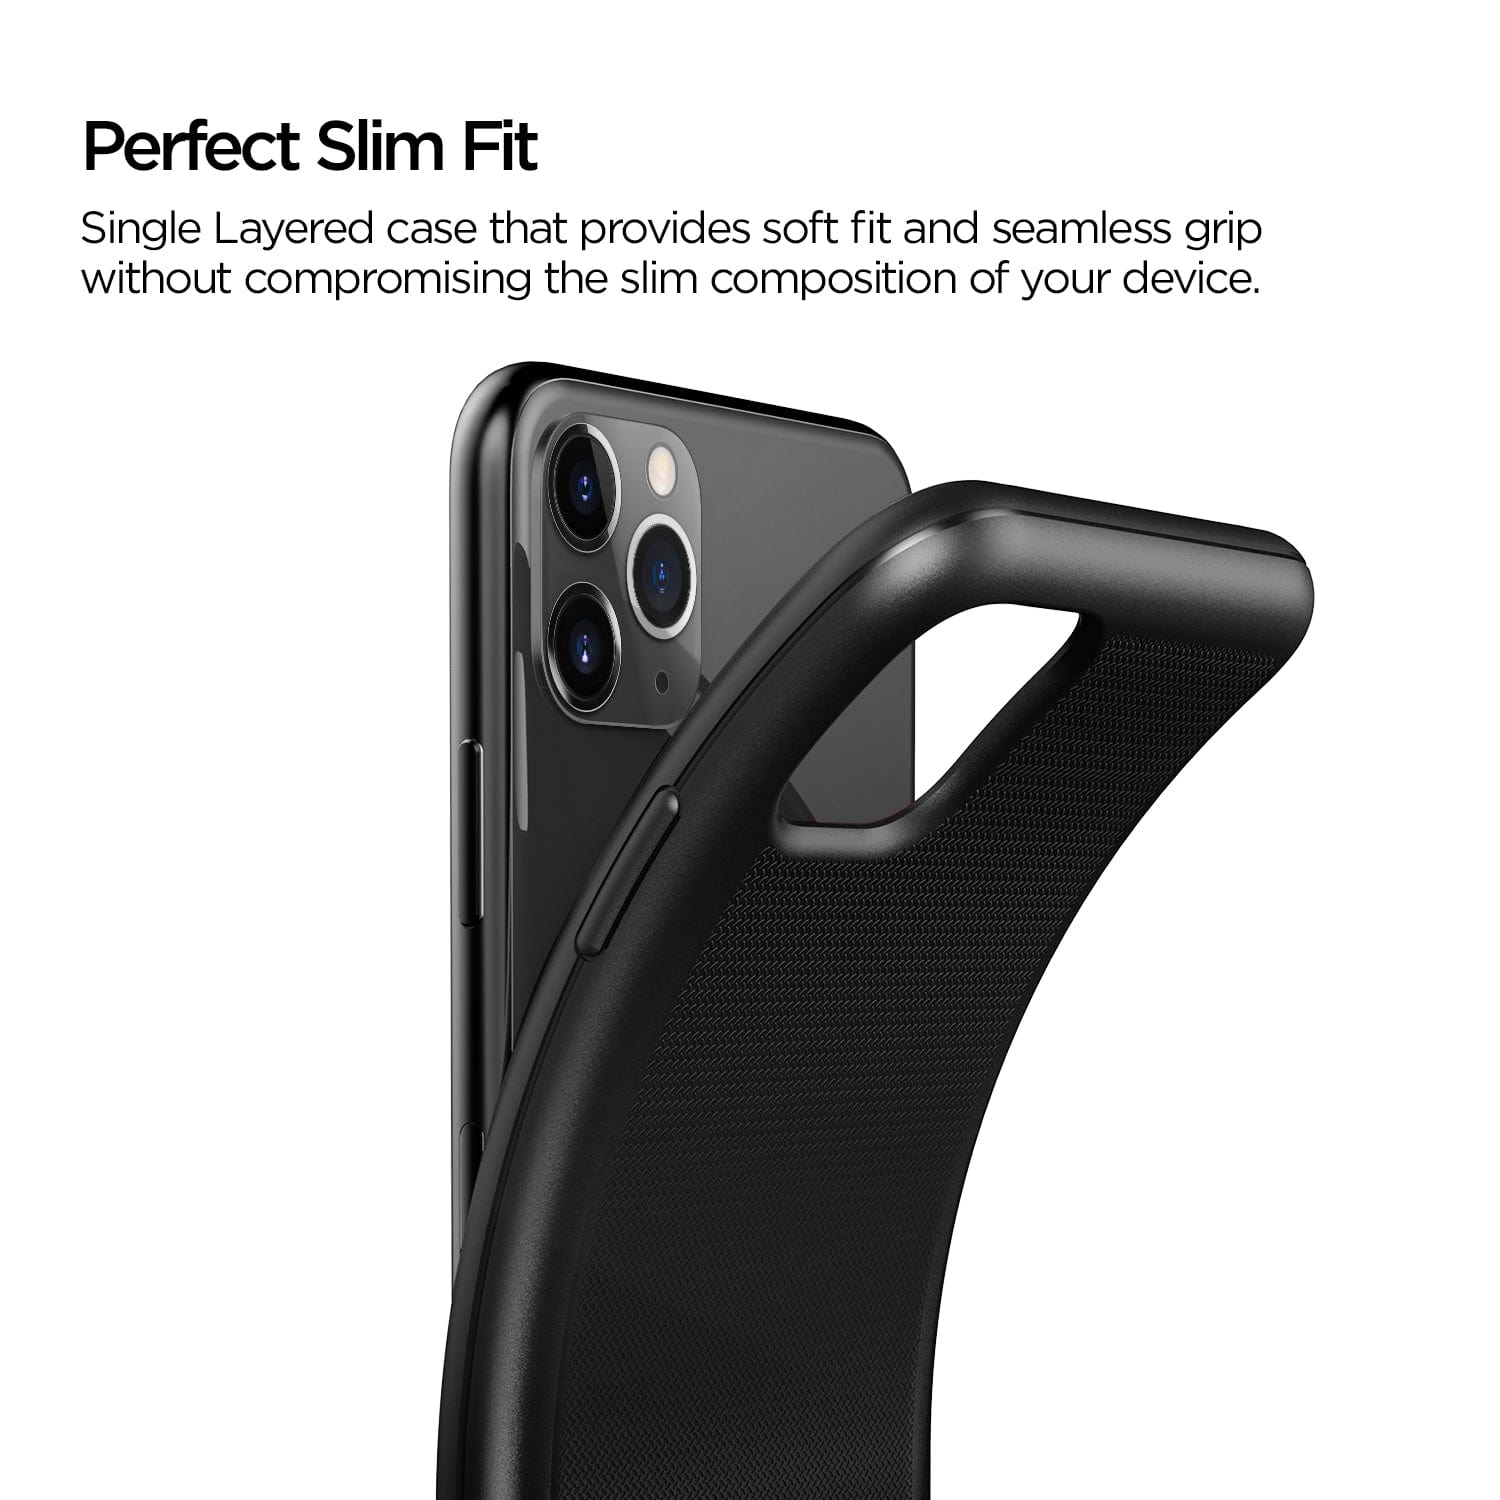 Our Single-Layered Case Offers a Soft, Seamless Grip Specifically Designed for iPhone 11 Pro Max